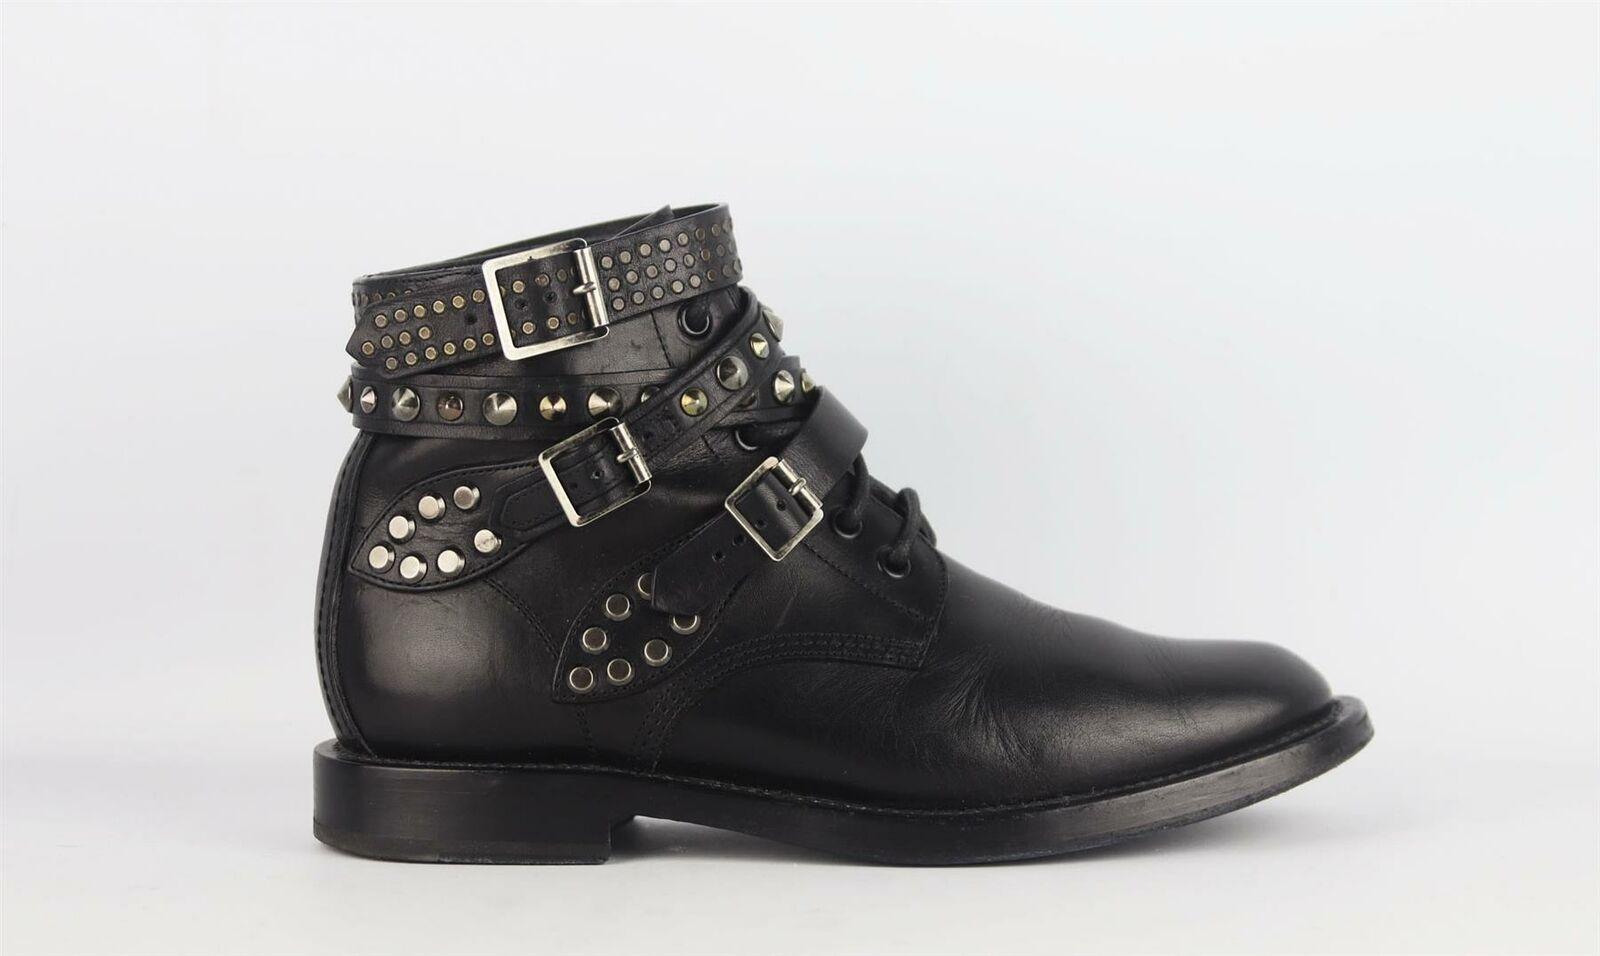 The season's punk looks are all about having a devil-may-care attitude and Saint Laurent's leather boots are full of rebellious spirit, heavily studded and finished with buckled straps, this runway pair is constructed with a durable heel and